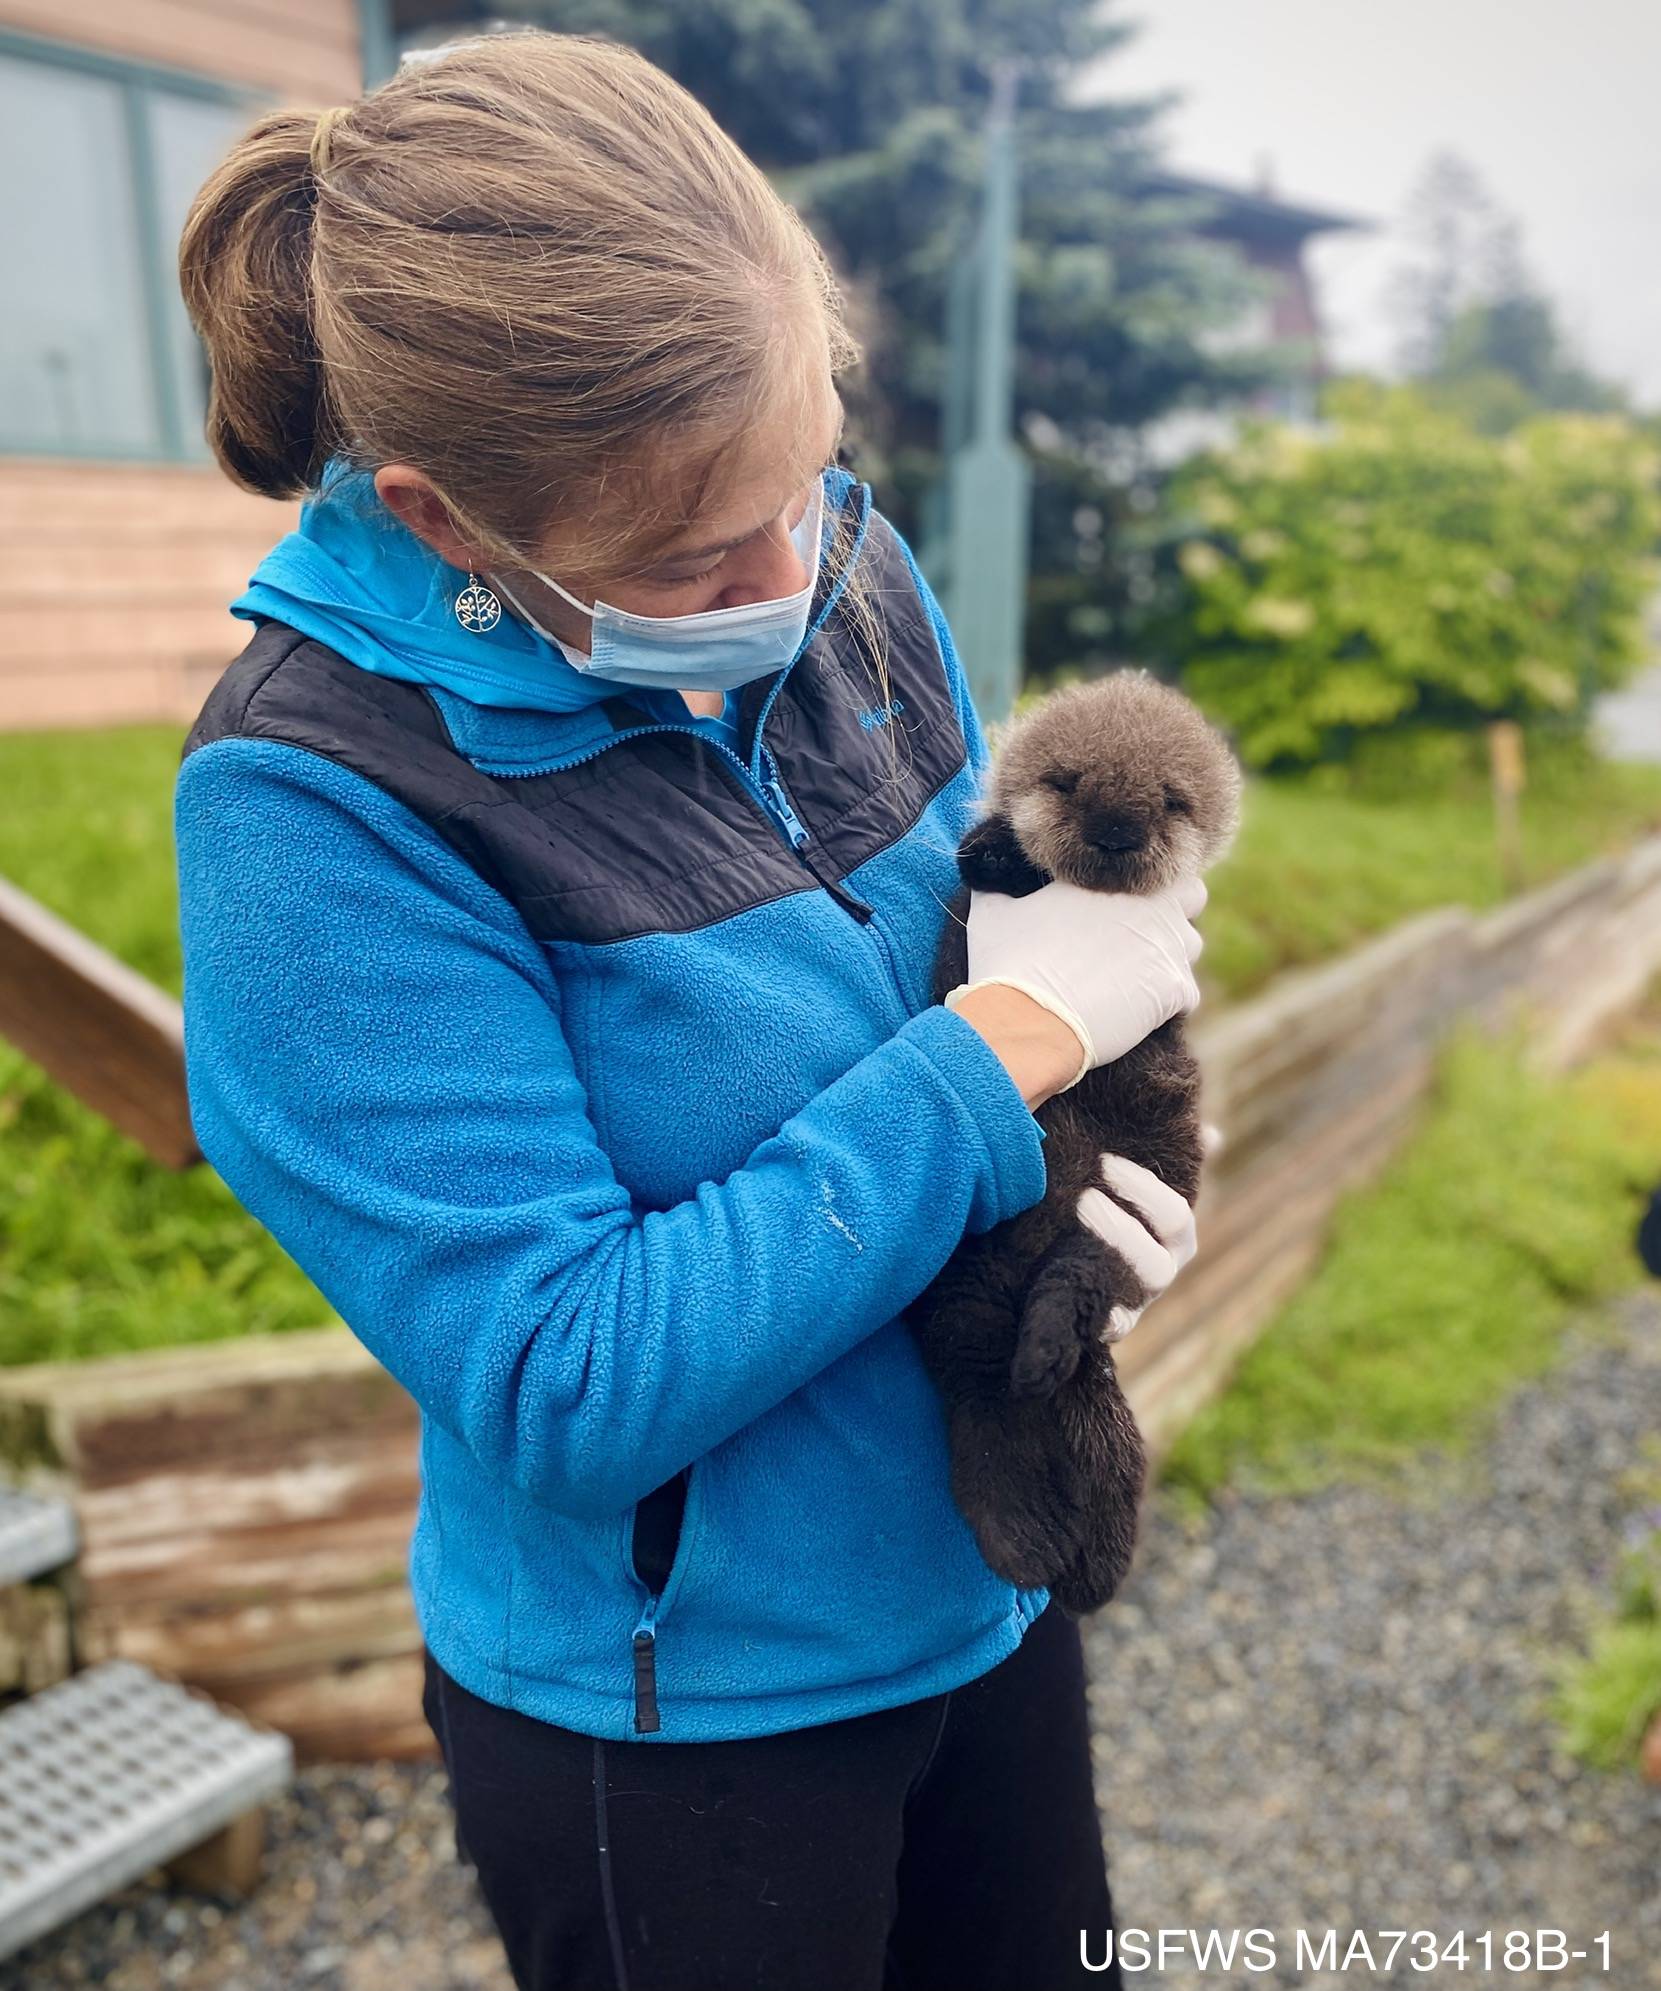 Chloe Rossman / Alaska SeaLife Center
The Homer Veterinary Clinic was called upon to administer fluids to a sea otter pup recently admitted to the Alaska SeaLife Center in Seward.